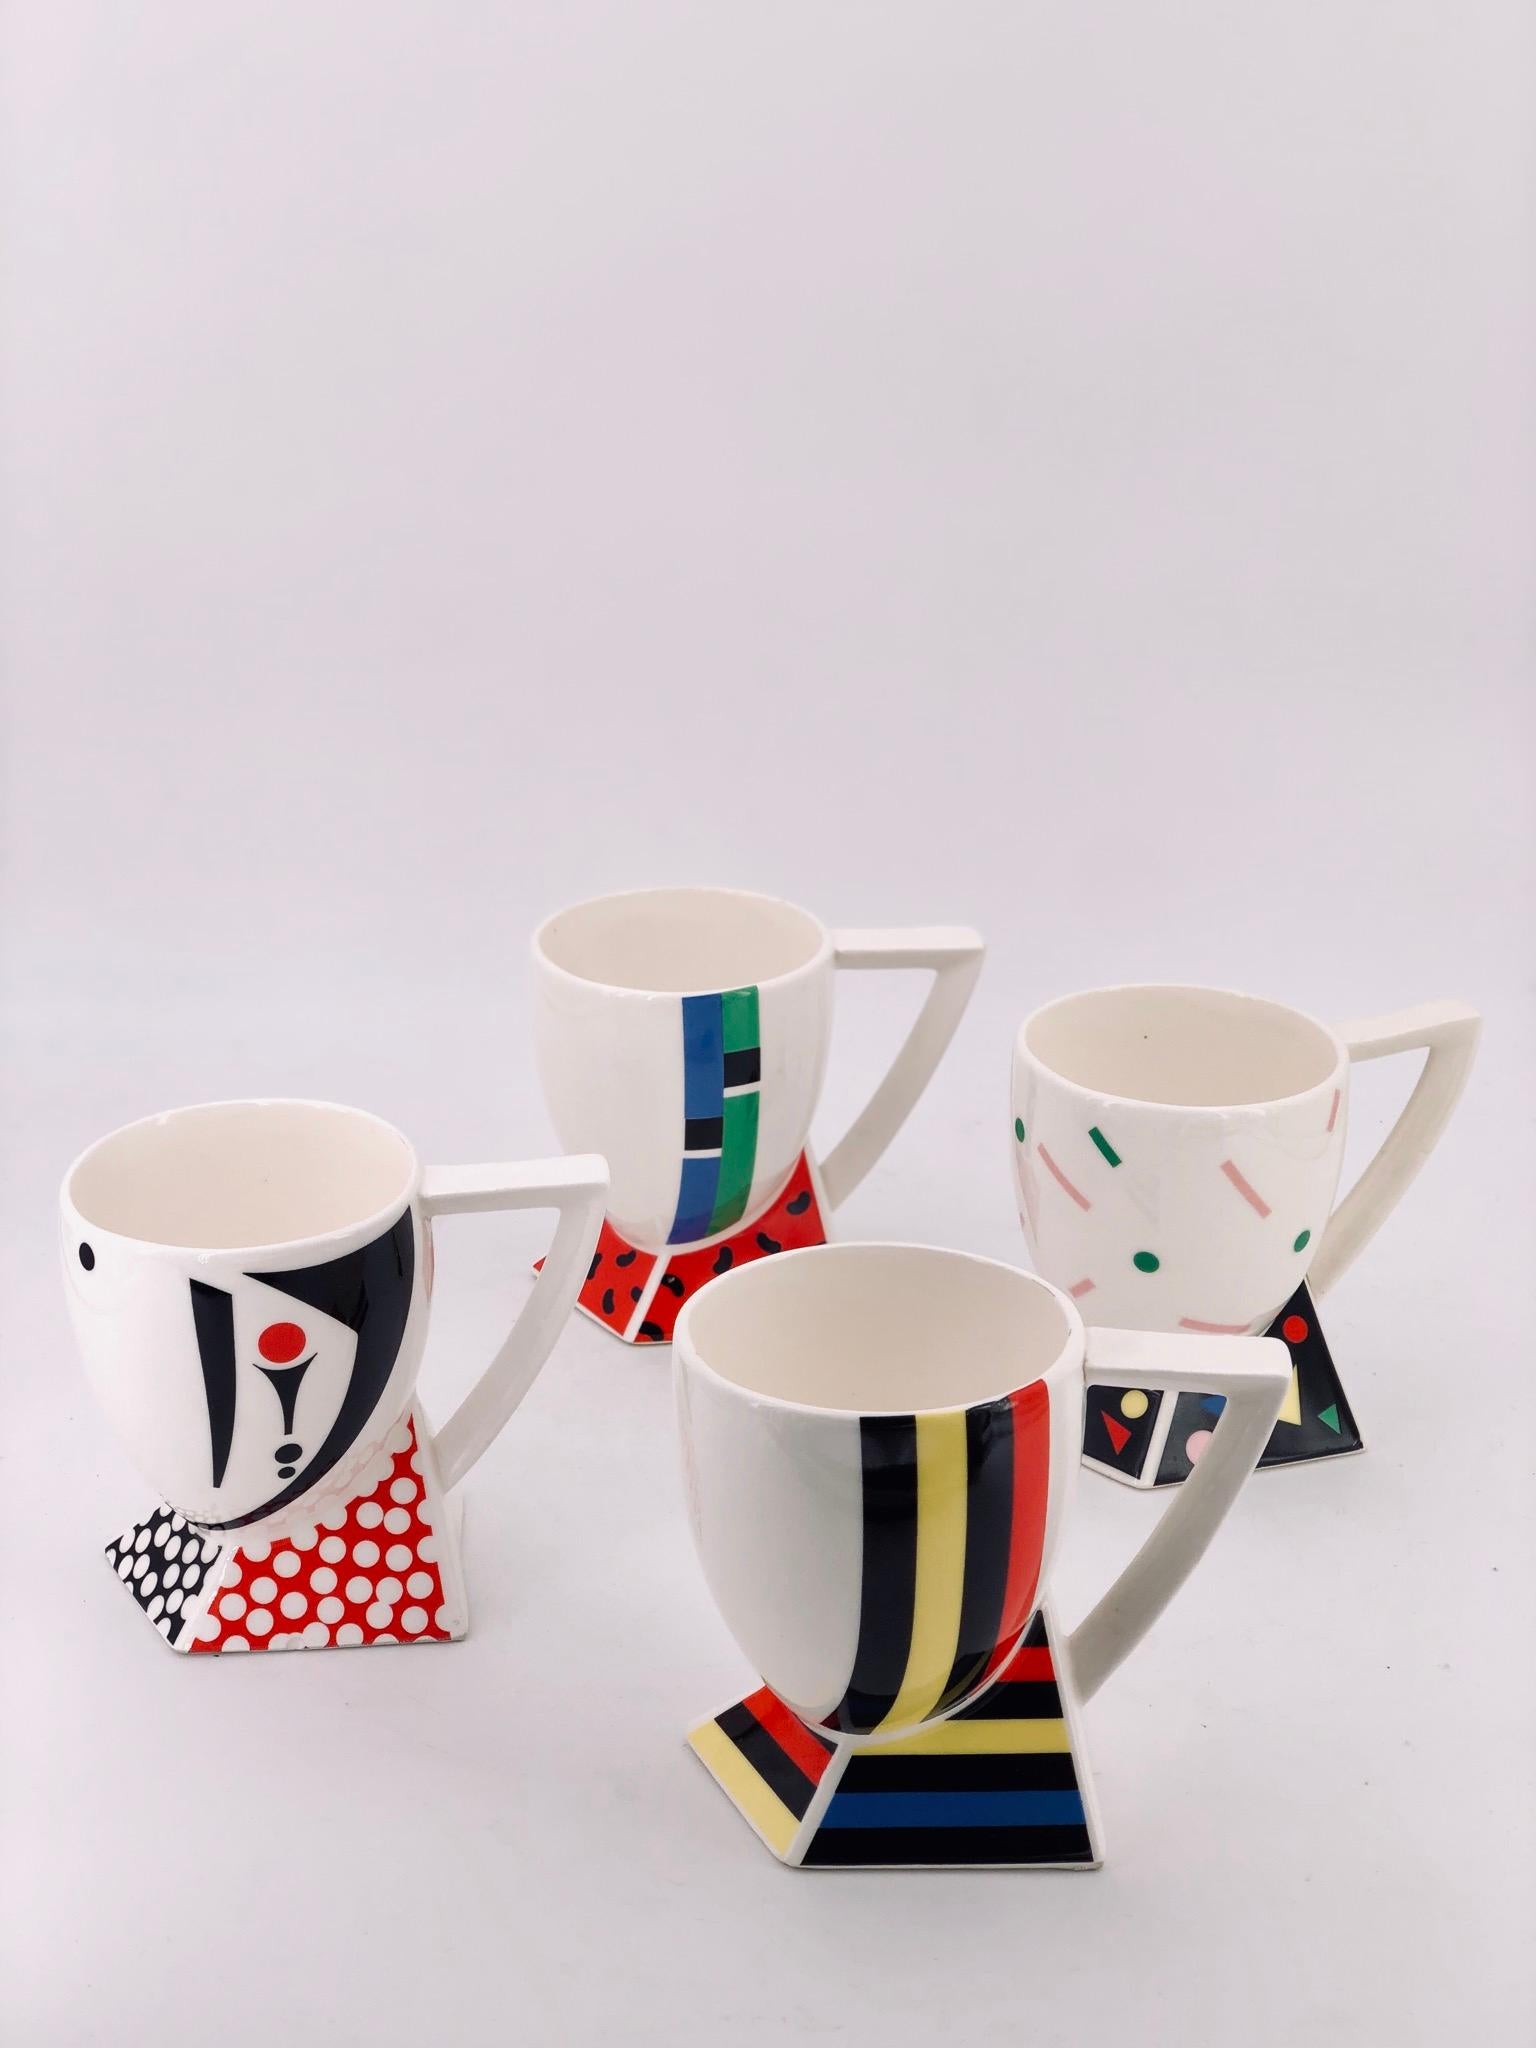 Great and rare set of 4 cups designed by Kato Kogei, Japan Alpha - 3 Fujimori Collection, great condition never used circa 1980s, Memphis.